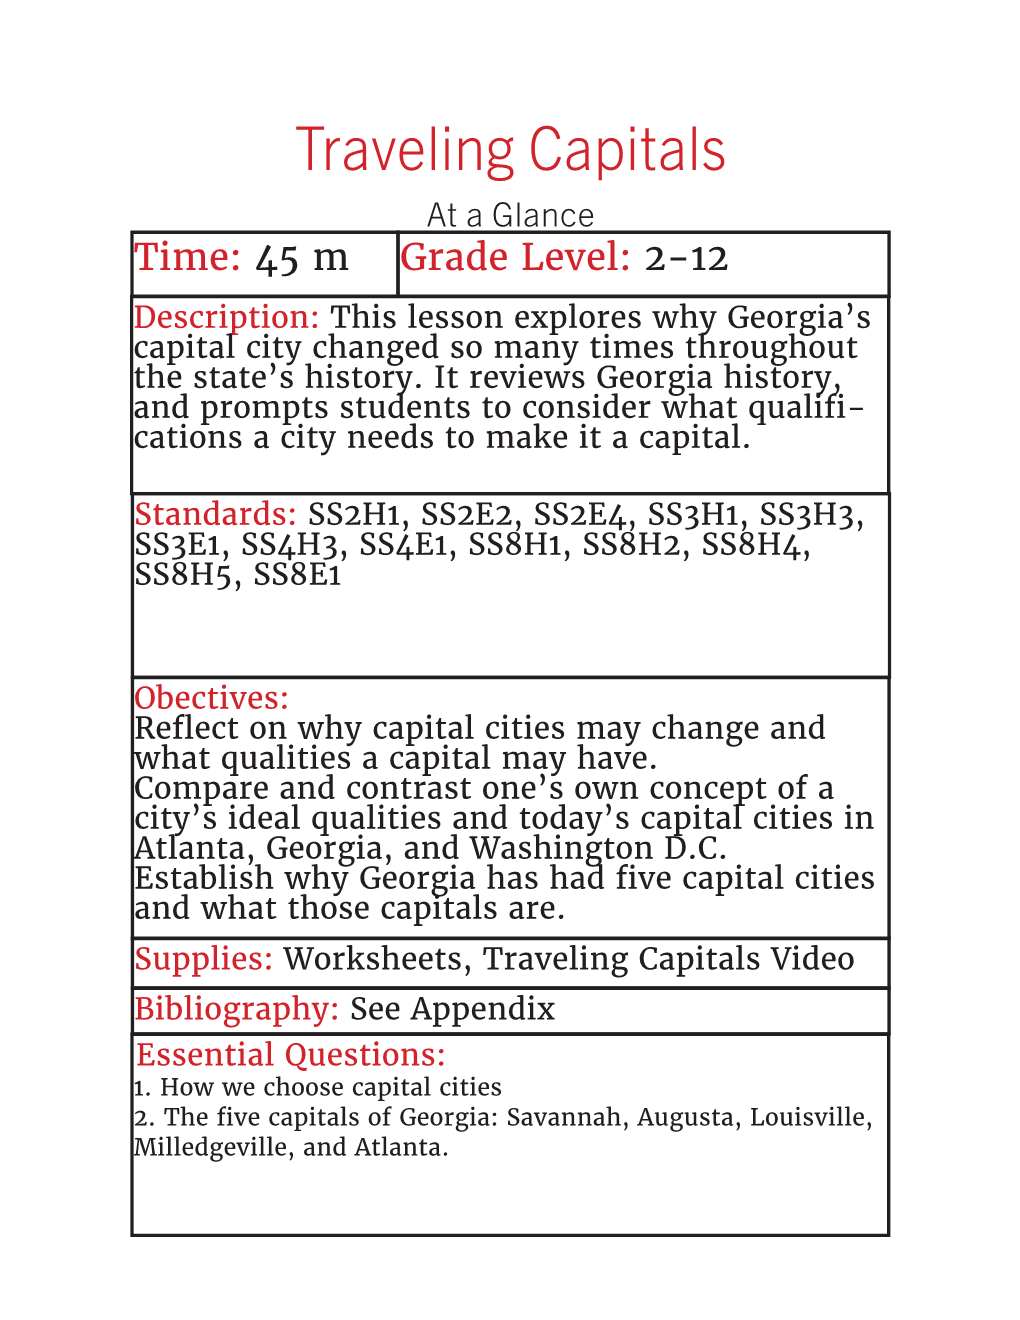 Traveling Capitals Lesson Plan